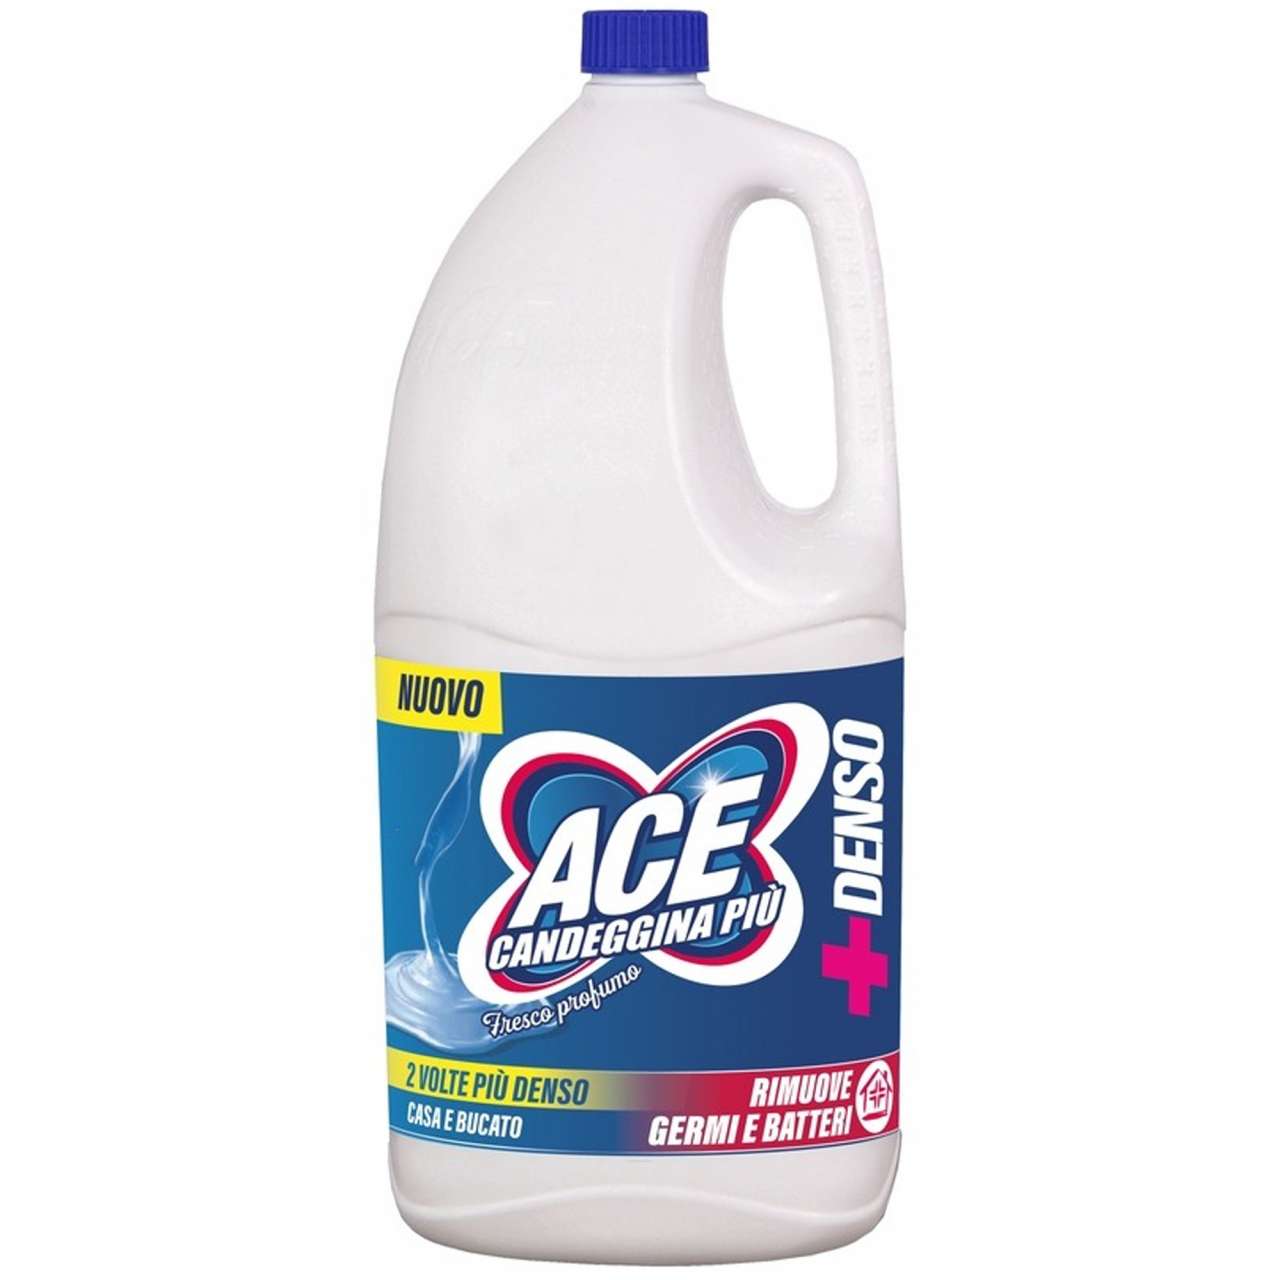 Ace thick fresher perfume Lt2.5